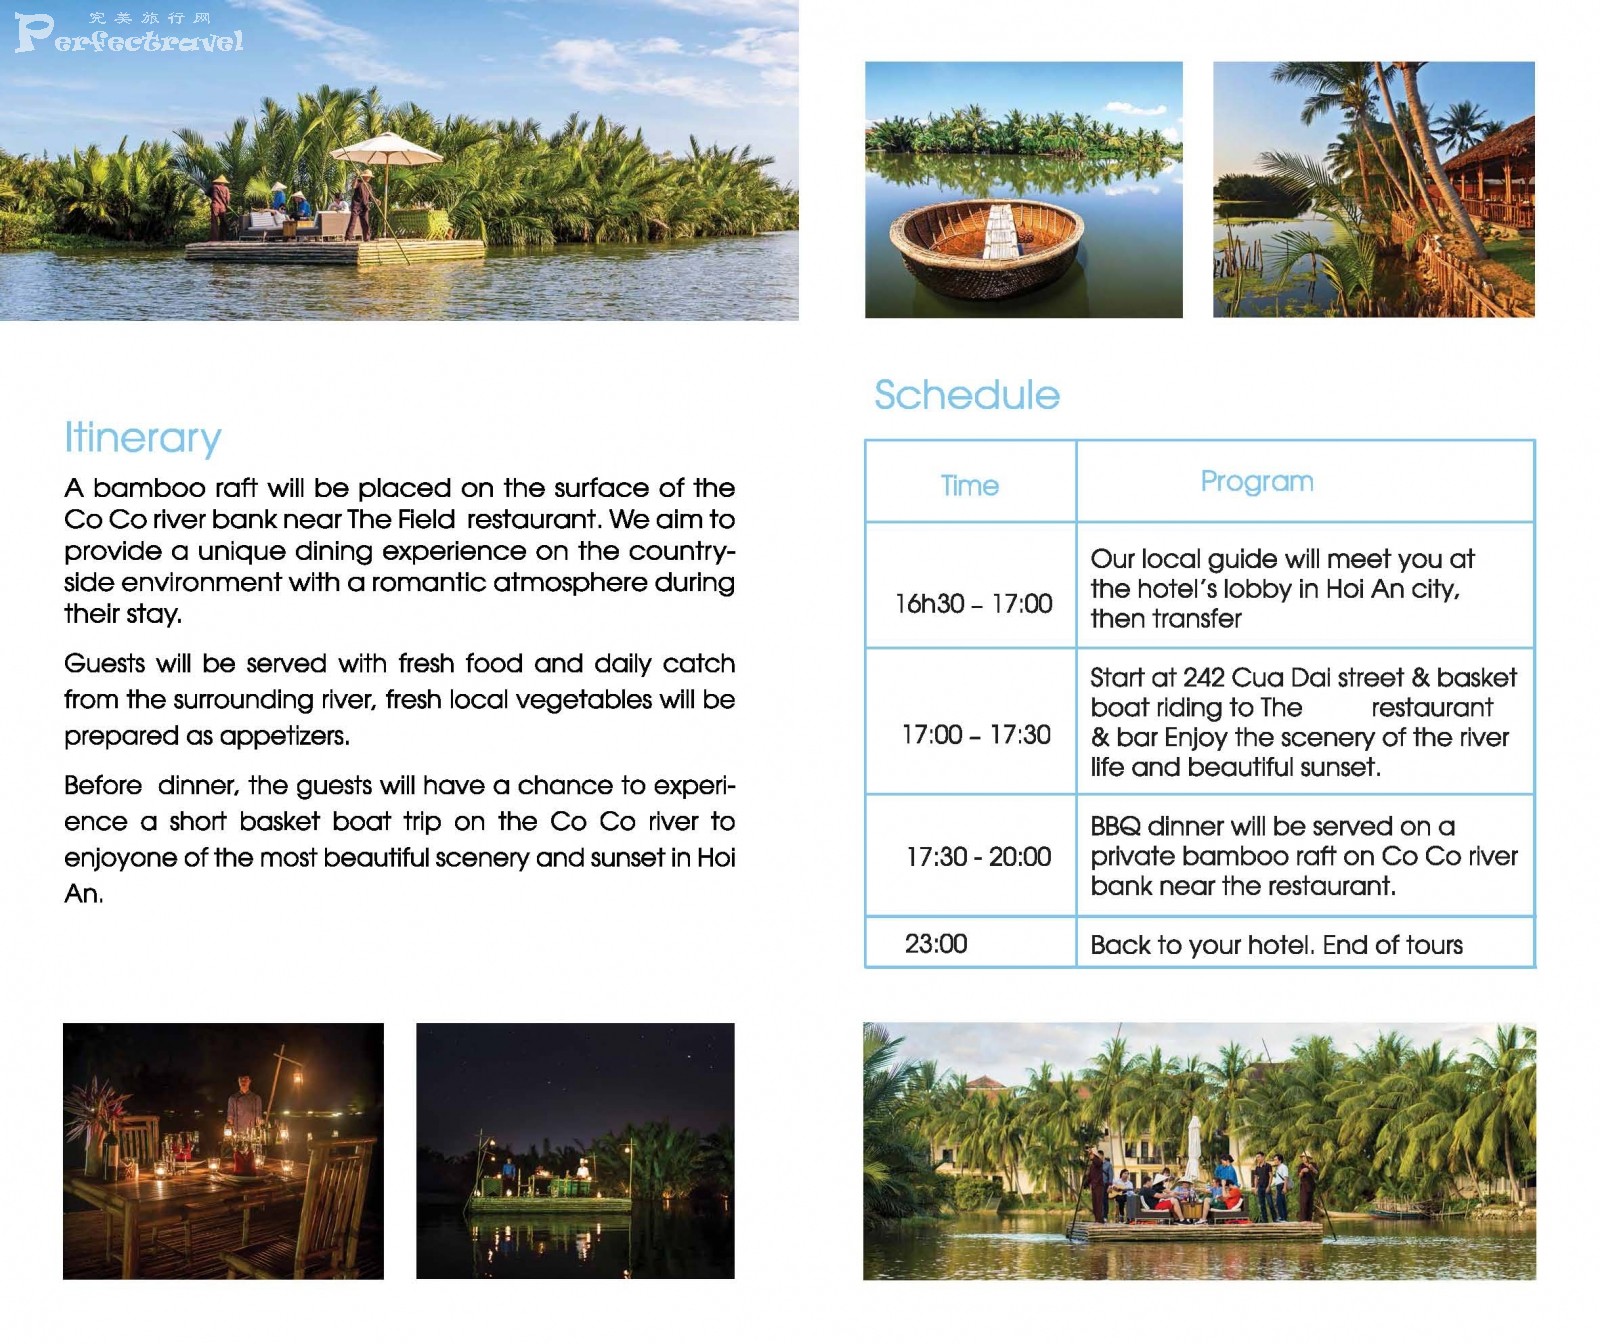 OPT-ET013_Dining on the bamboo raft_small_Page_2.jpg